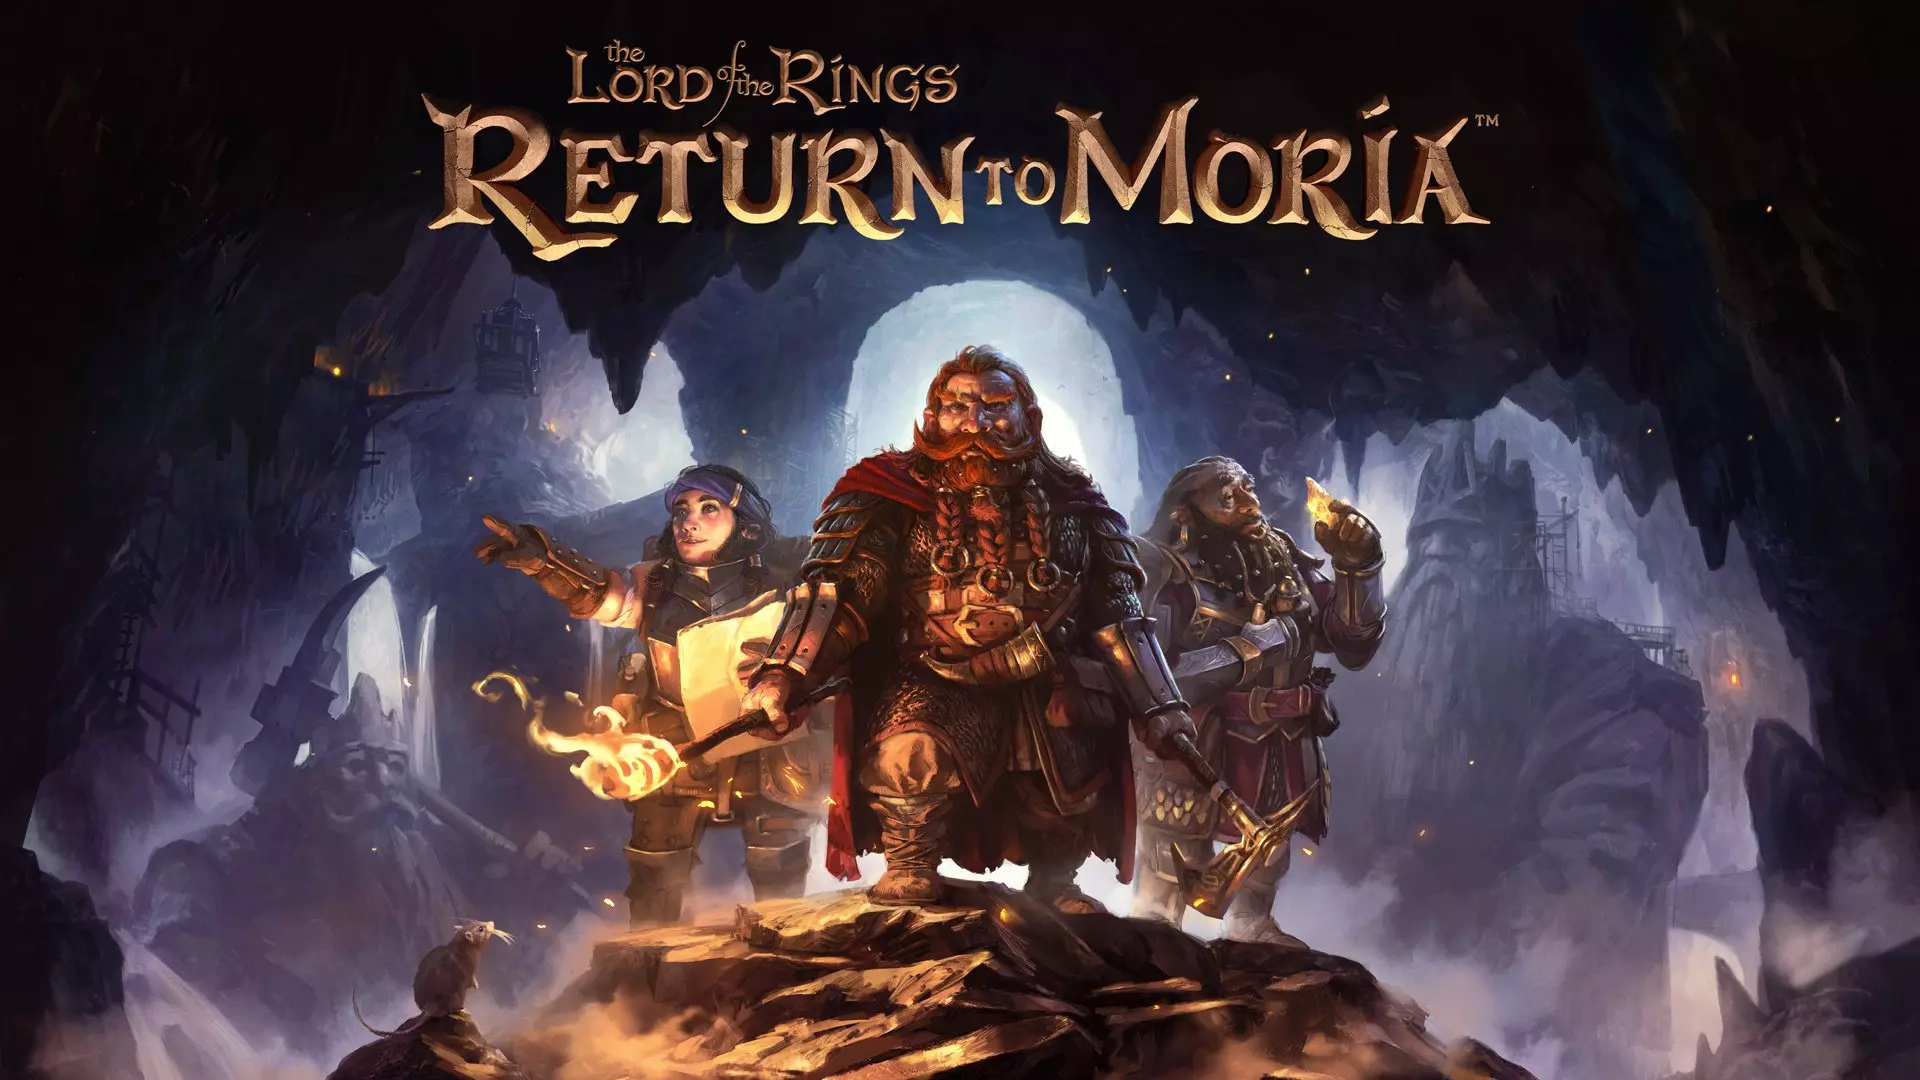 jaquette du jeu vidéo The Lord of the Rings: Return to Moria